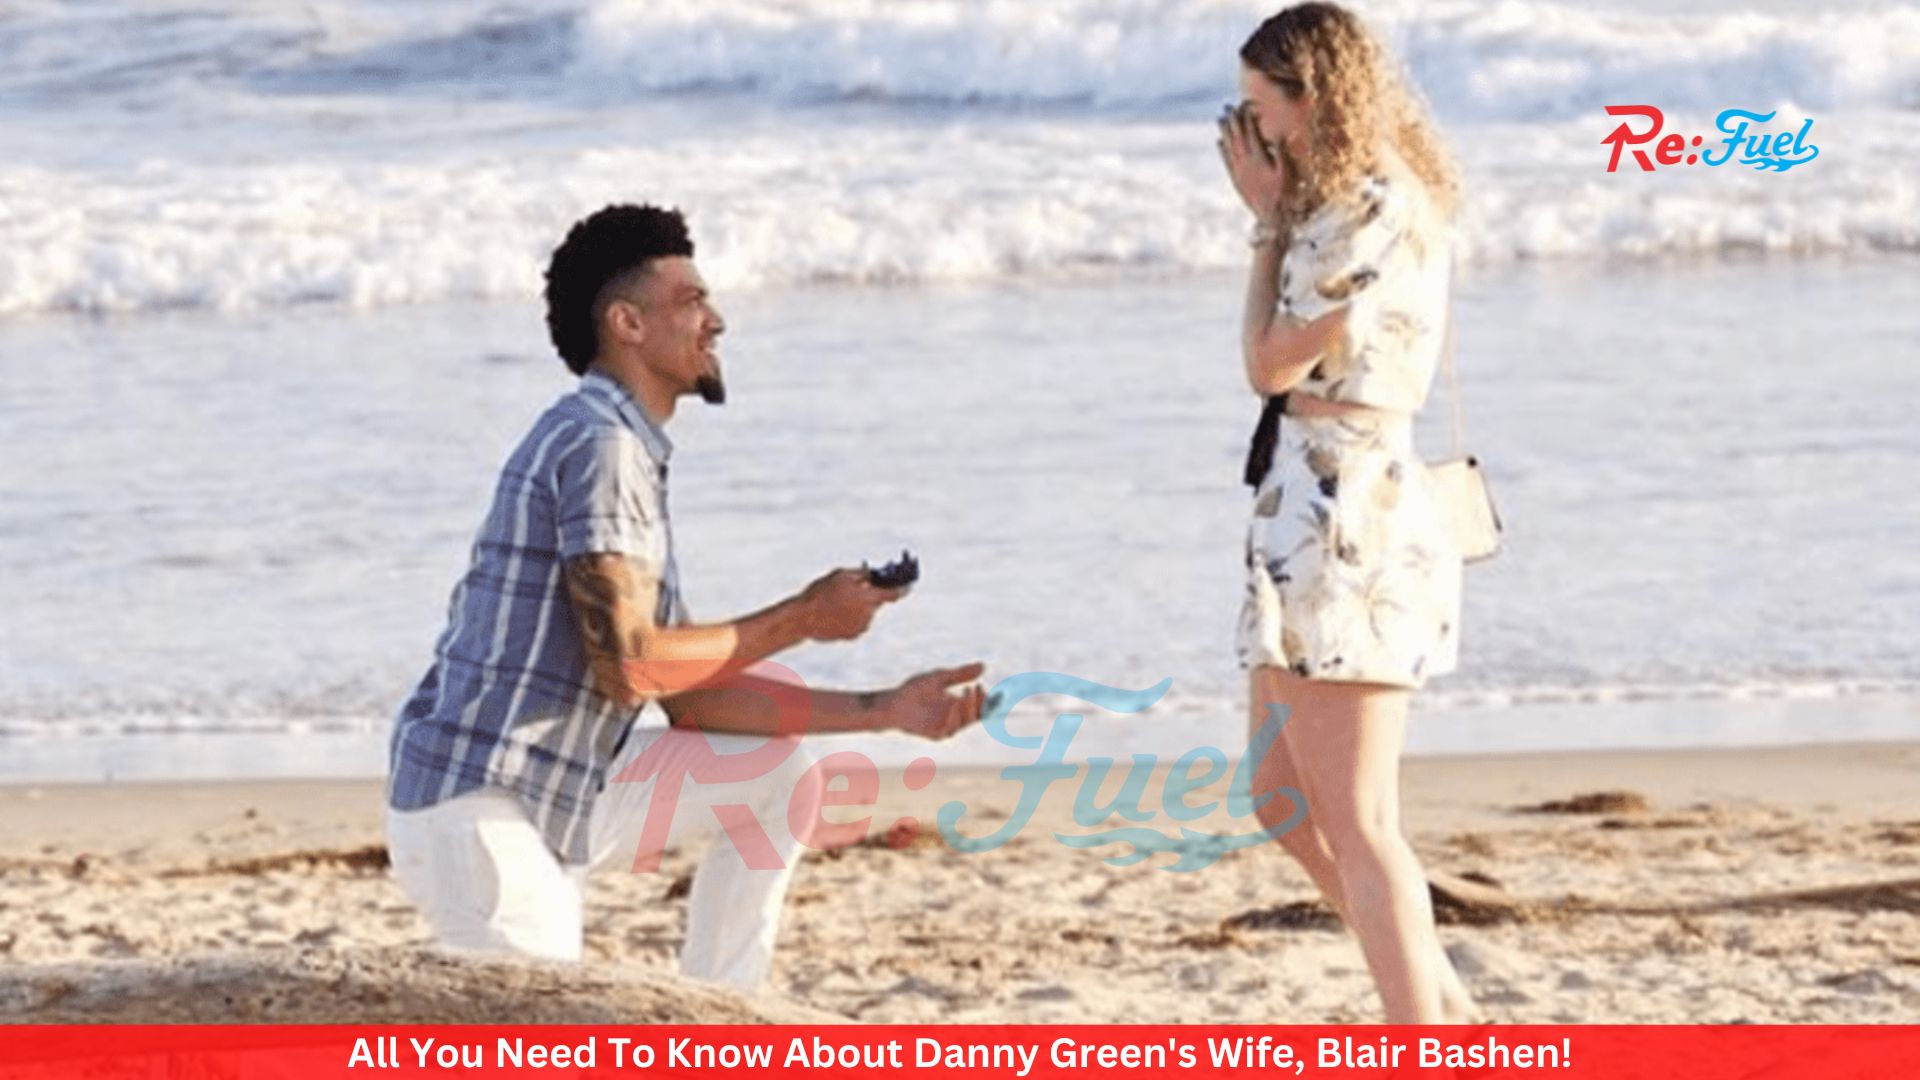 All You Need To Know About Danny Green's Wife, Blair Bashen!